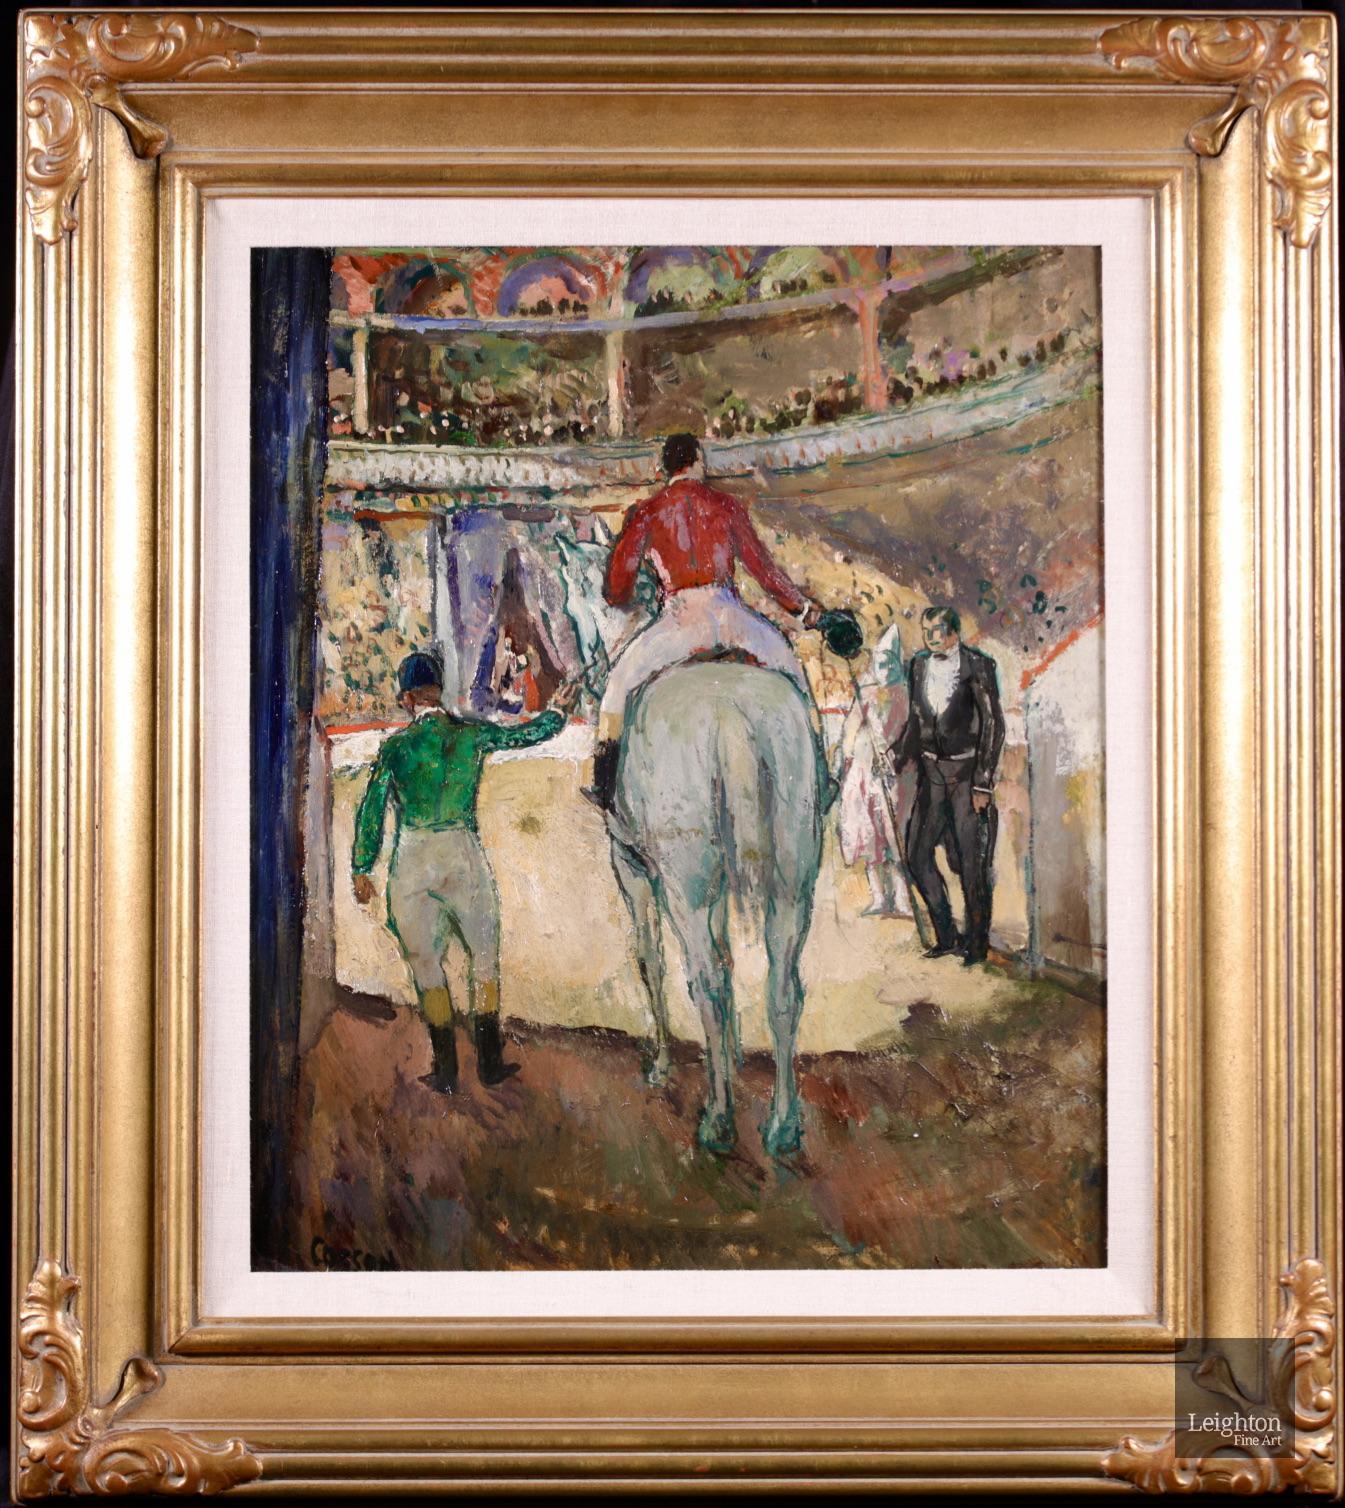 Au Cirque - Post Impressionist Oil, Figures & Horse at Circus by Marcel Cosson - Painting by Jean-Louis-Marcel Cosson